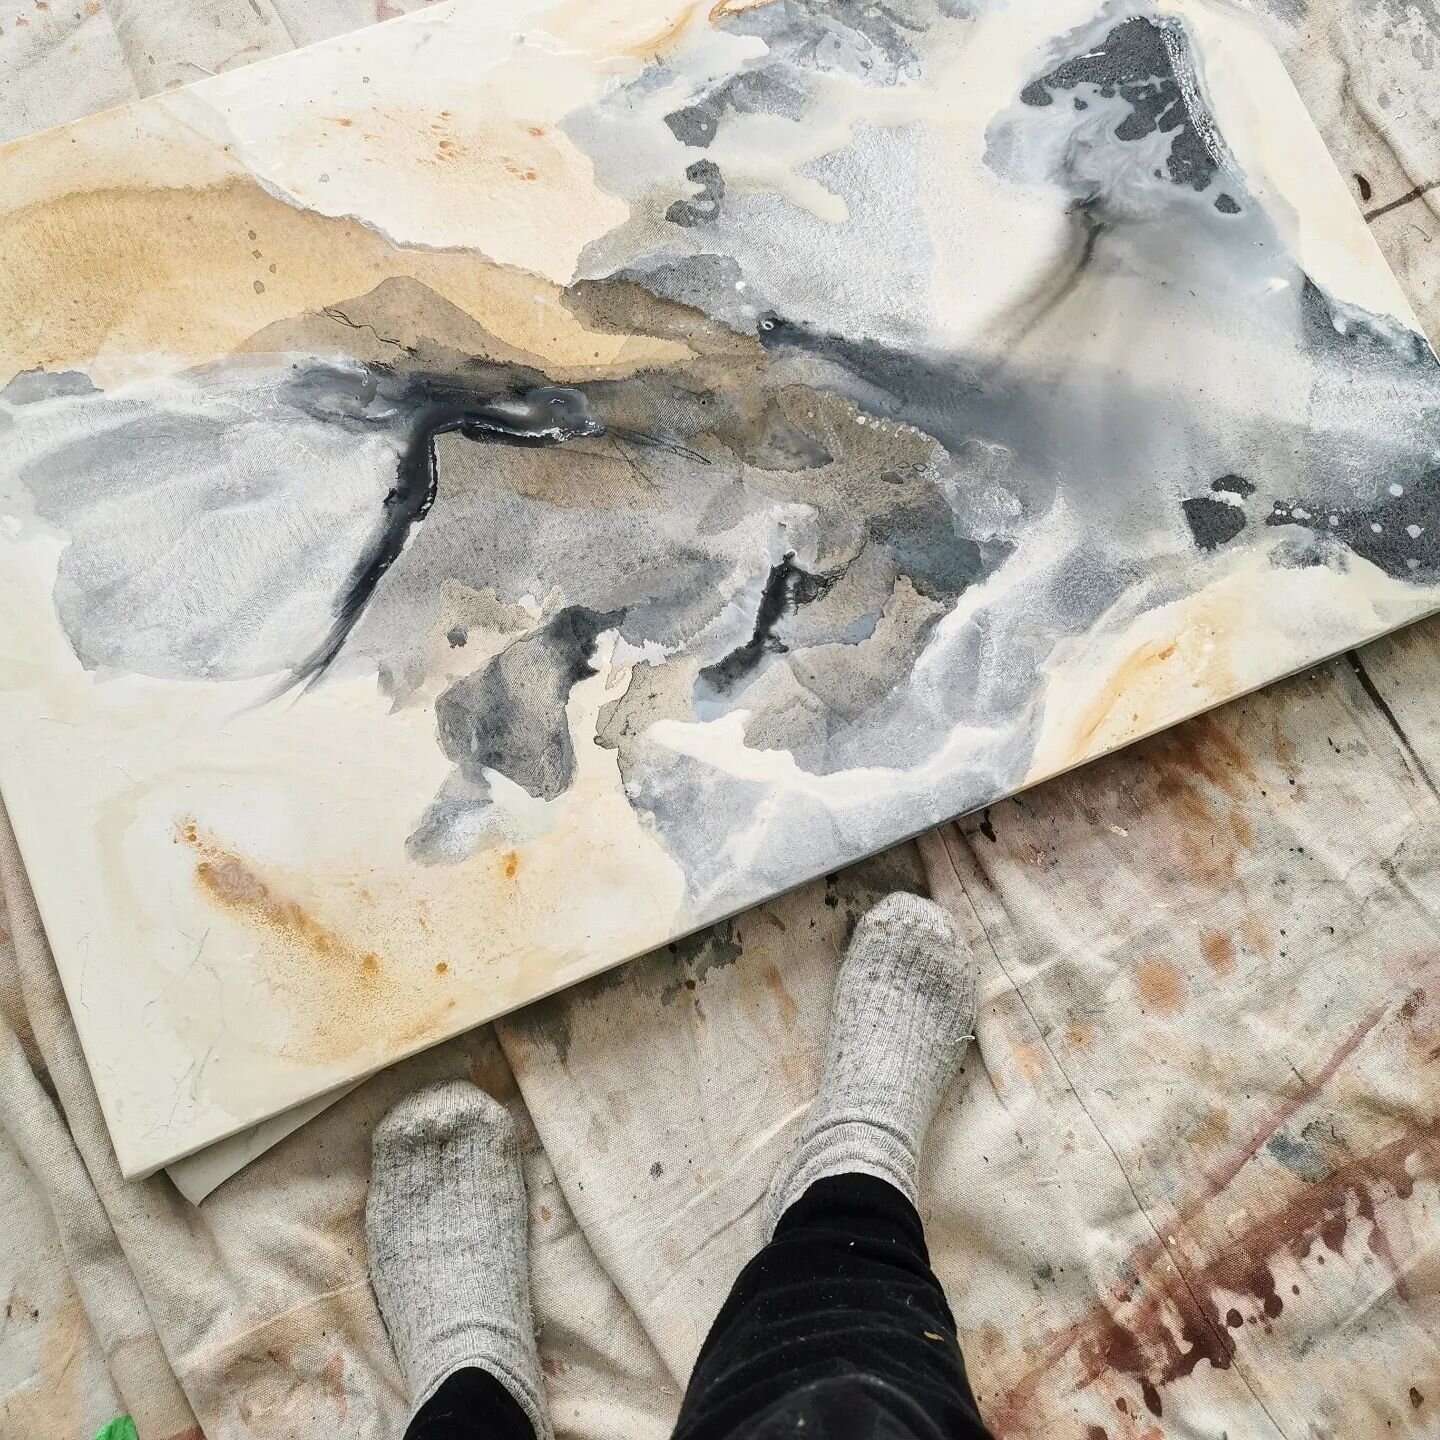 Playing with the remaining white gessoed canvas i have. I really prefer raw canvas, but its interesting to challenge me to work on something that feels less natural and intuitive. We'll see where it takes this piece :)

Je m'amuse avec un canvas appr